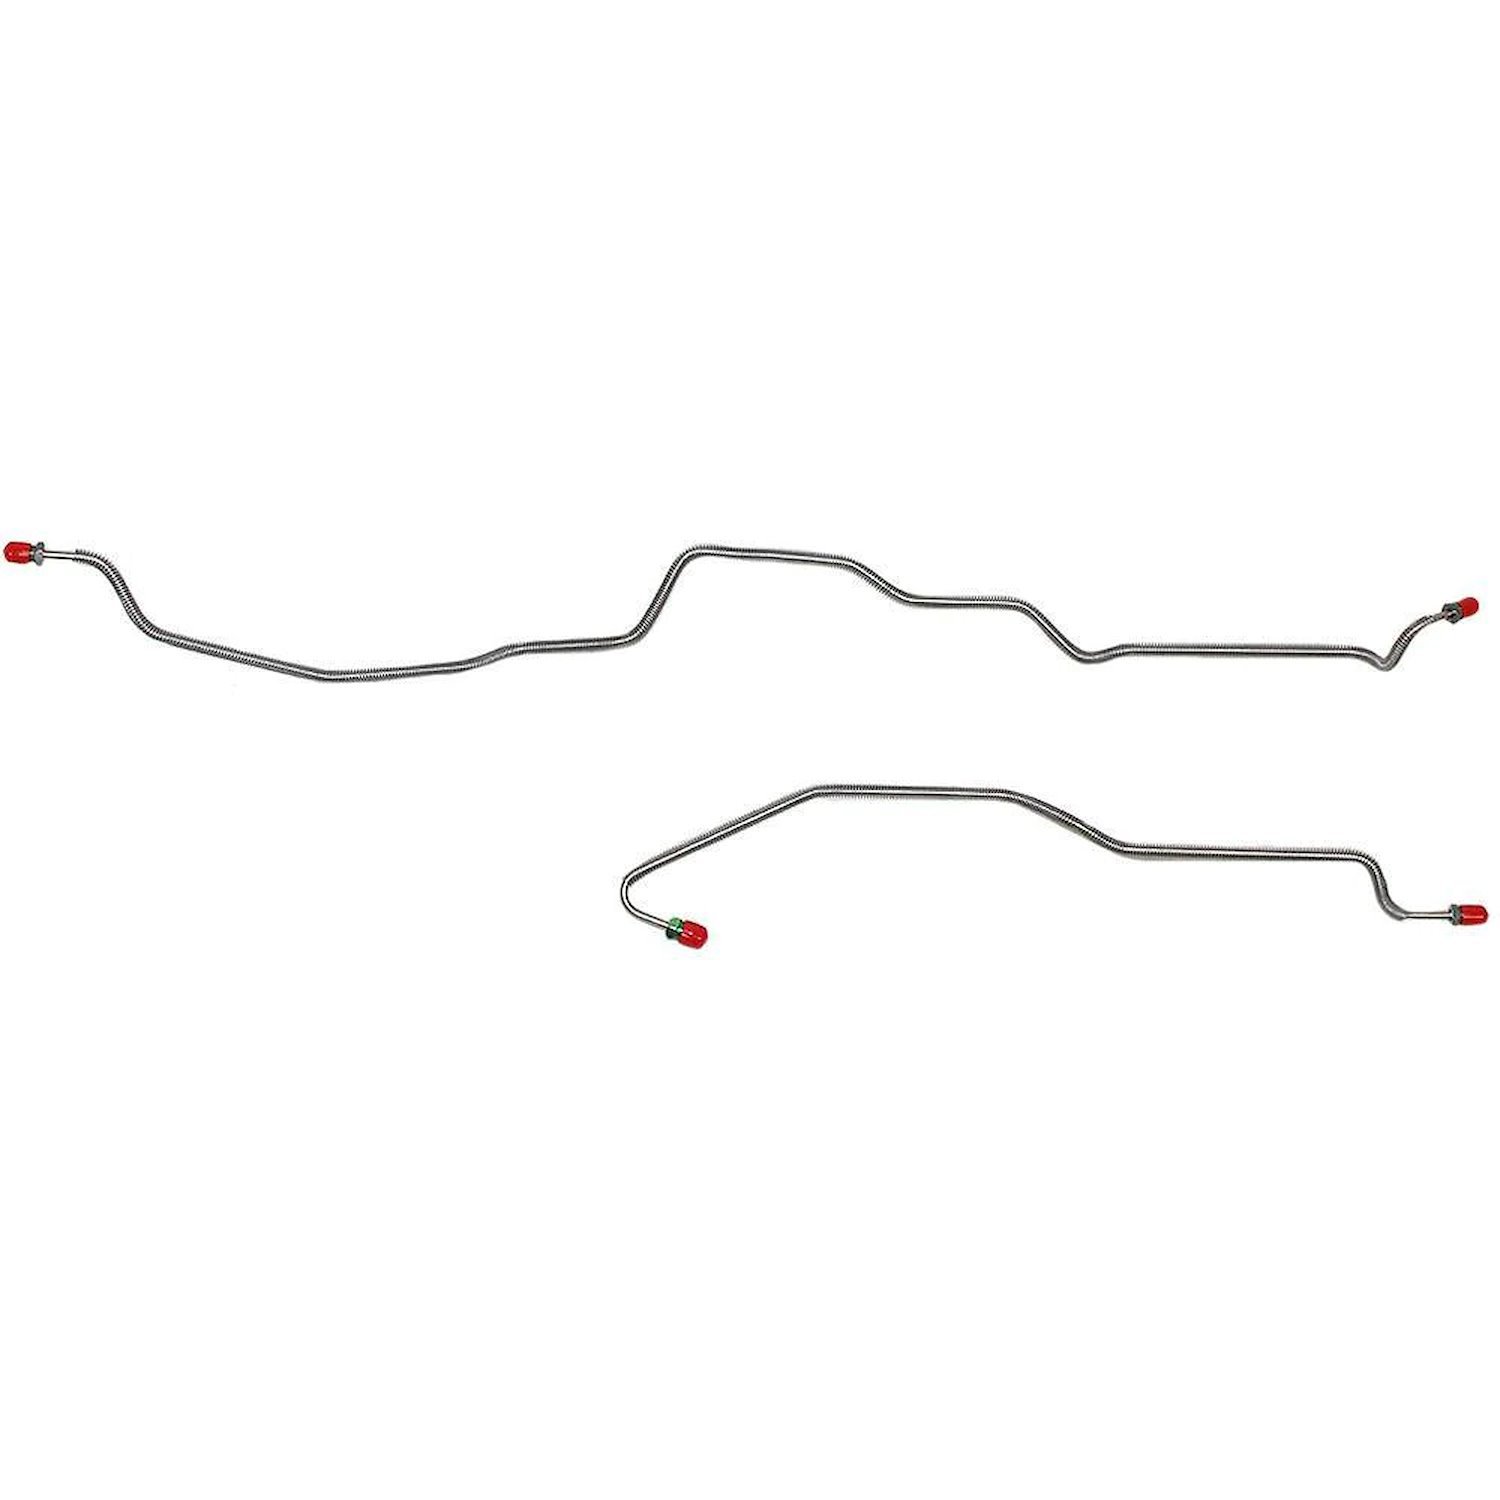 Rear Axle Brake Line Set for 1995-1997 Chevy